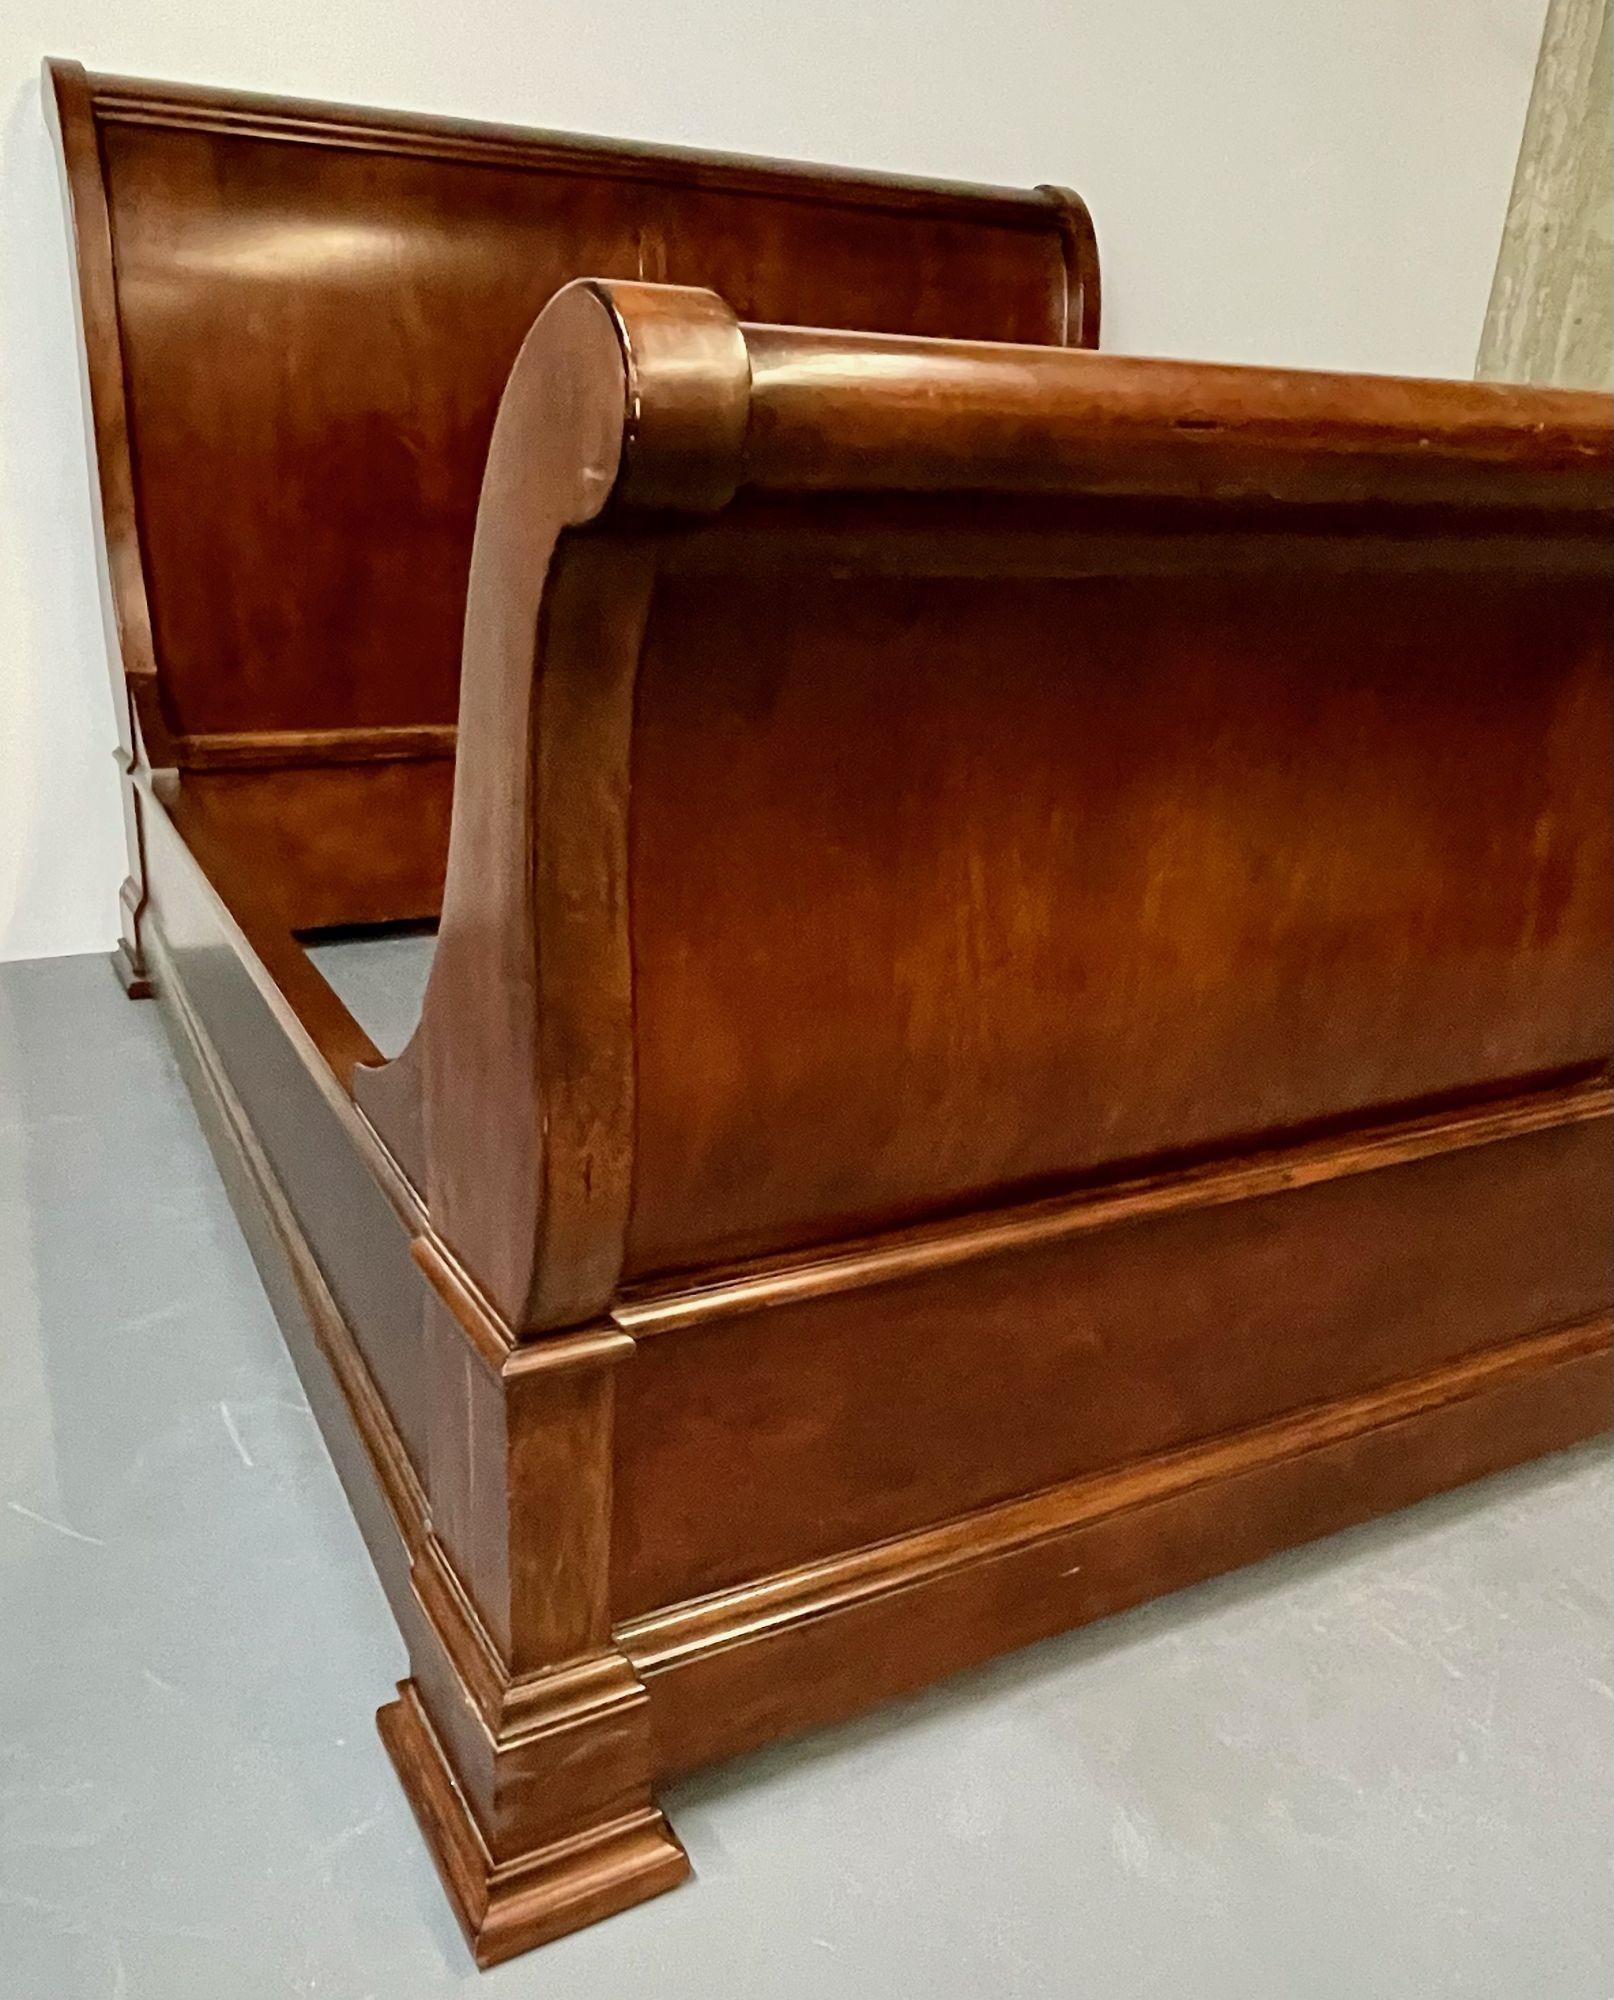 Philippine Solid Mahogany King Size Bedframe, Sleigh Bed, Ralph Lauren Style